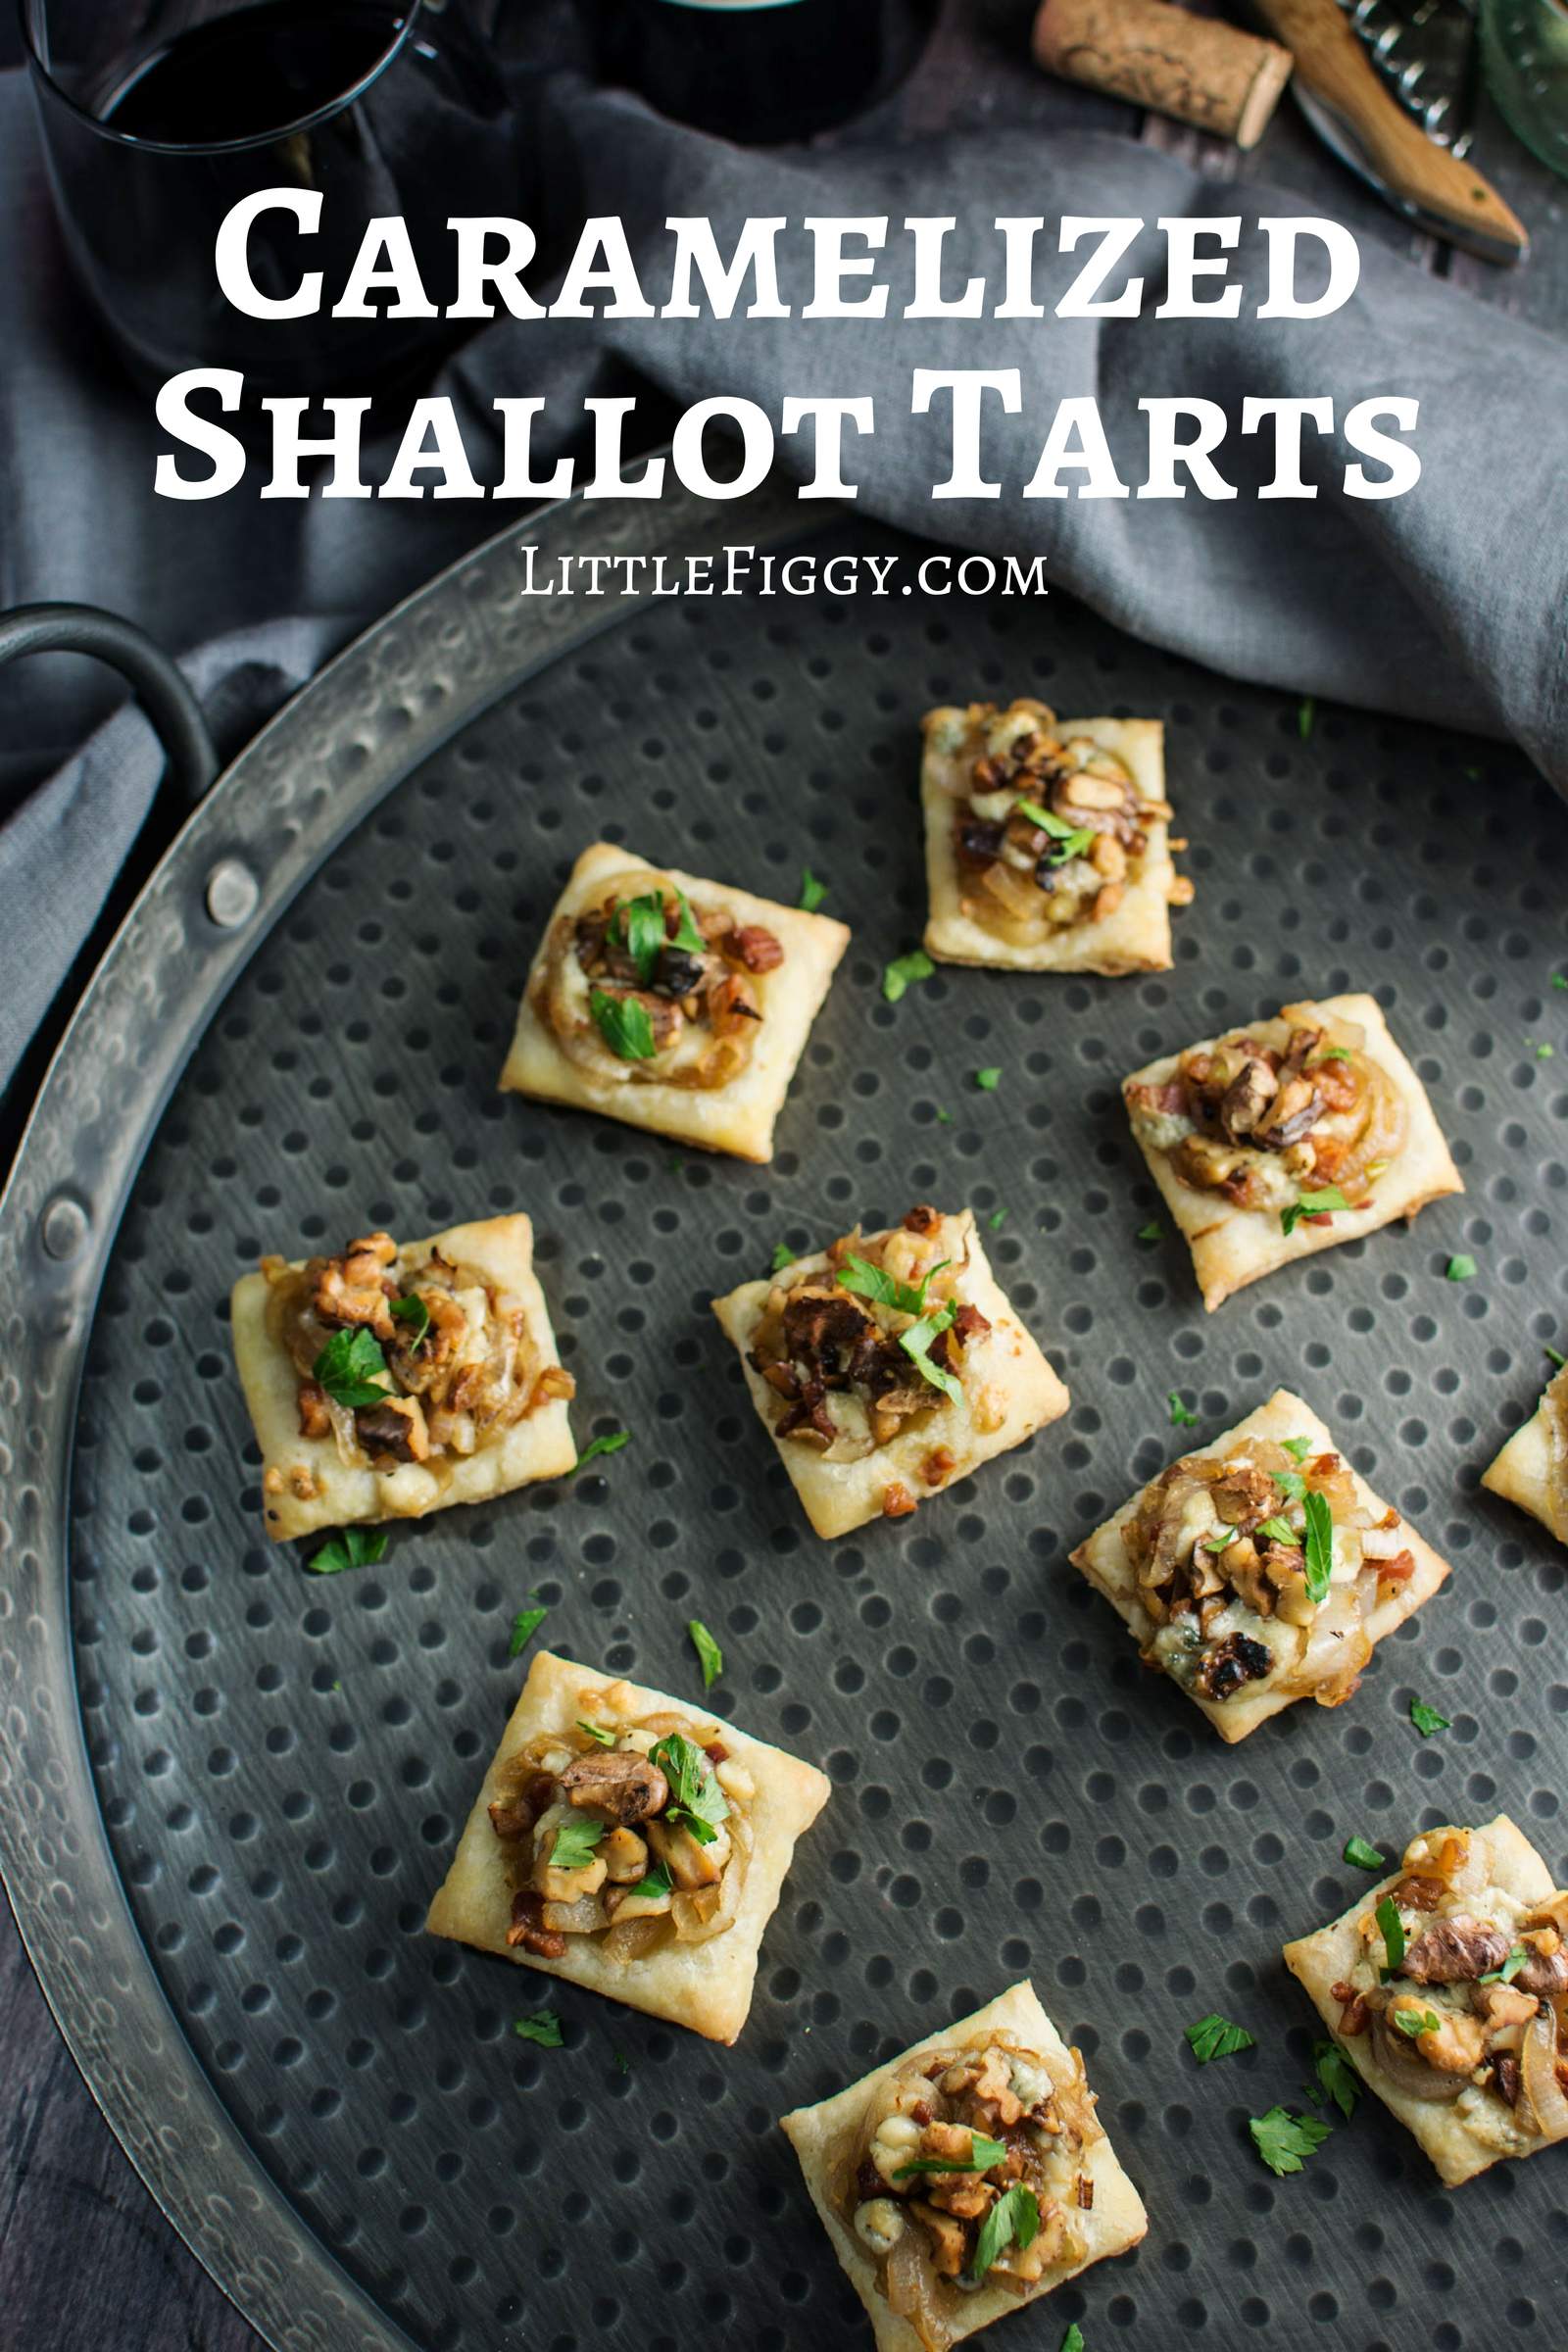 Thesetasty appetizers, Caramelized Shallot Tarts, are so easy to make and great to share with friends, family and @CavitWines! #Cavitwines #LivetheCavitLife #ad